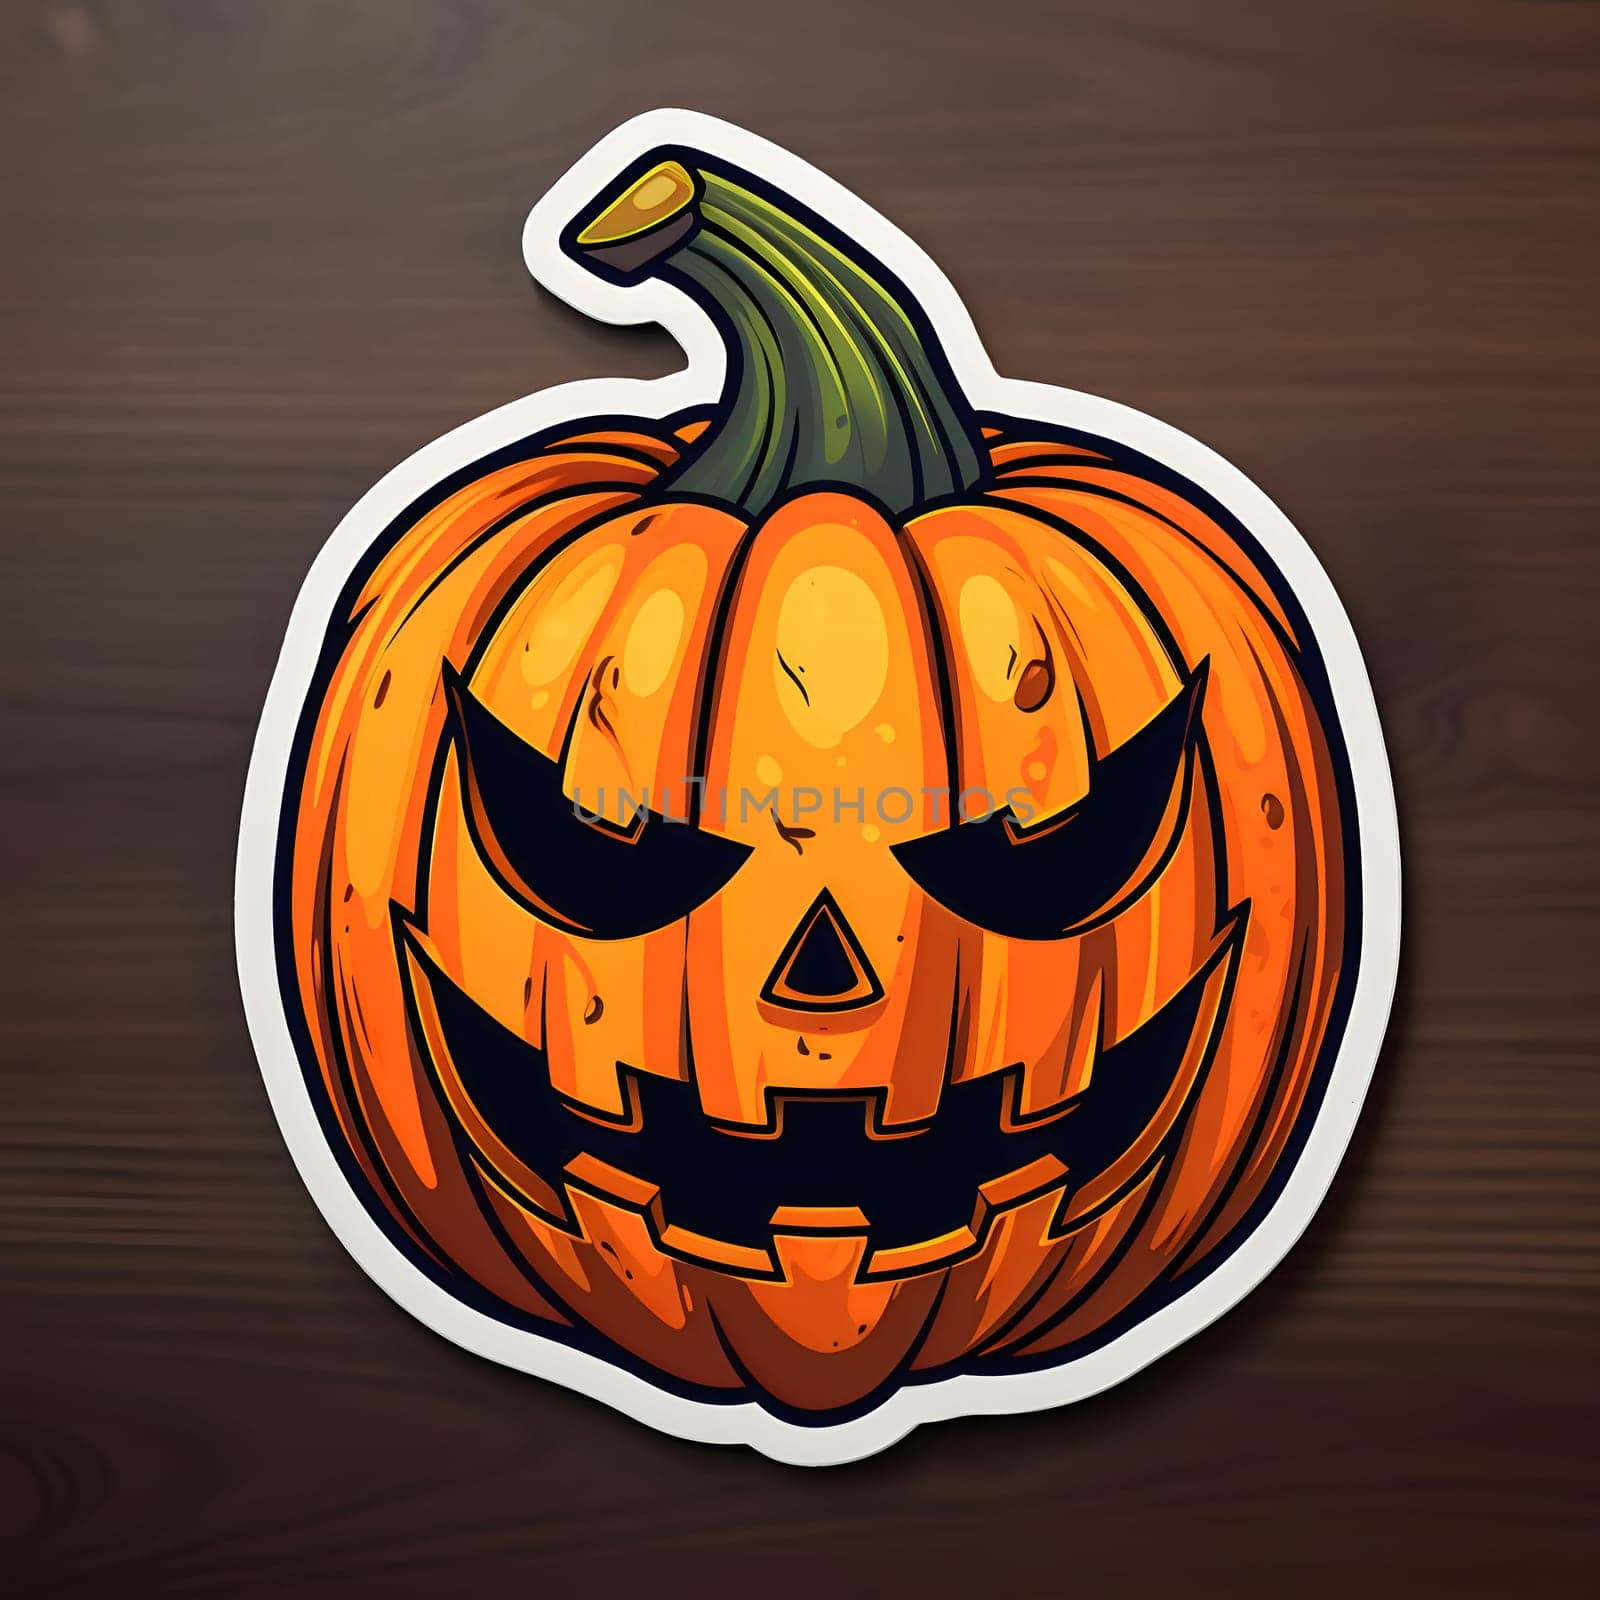 Jack-o-lantern pumpkin sticker, Halloween image on a dark isolated background. Atmosphere of darkness and fear.